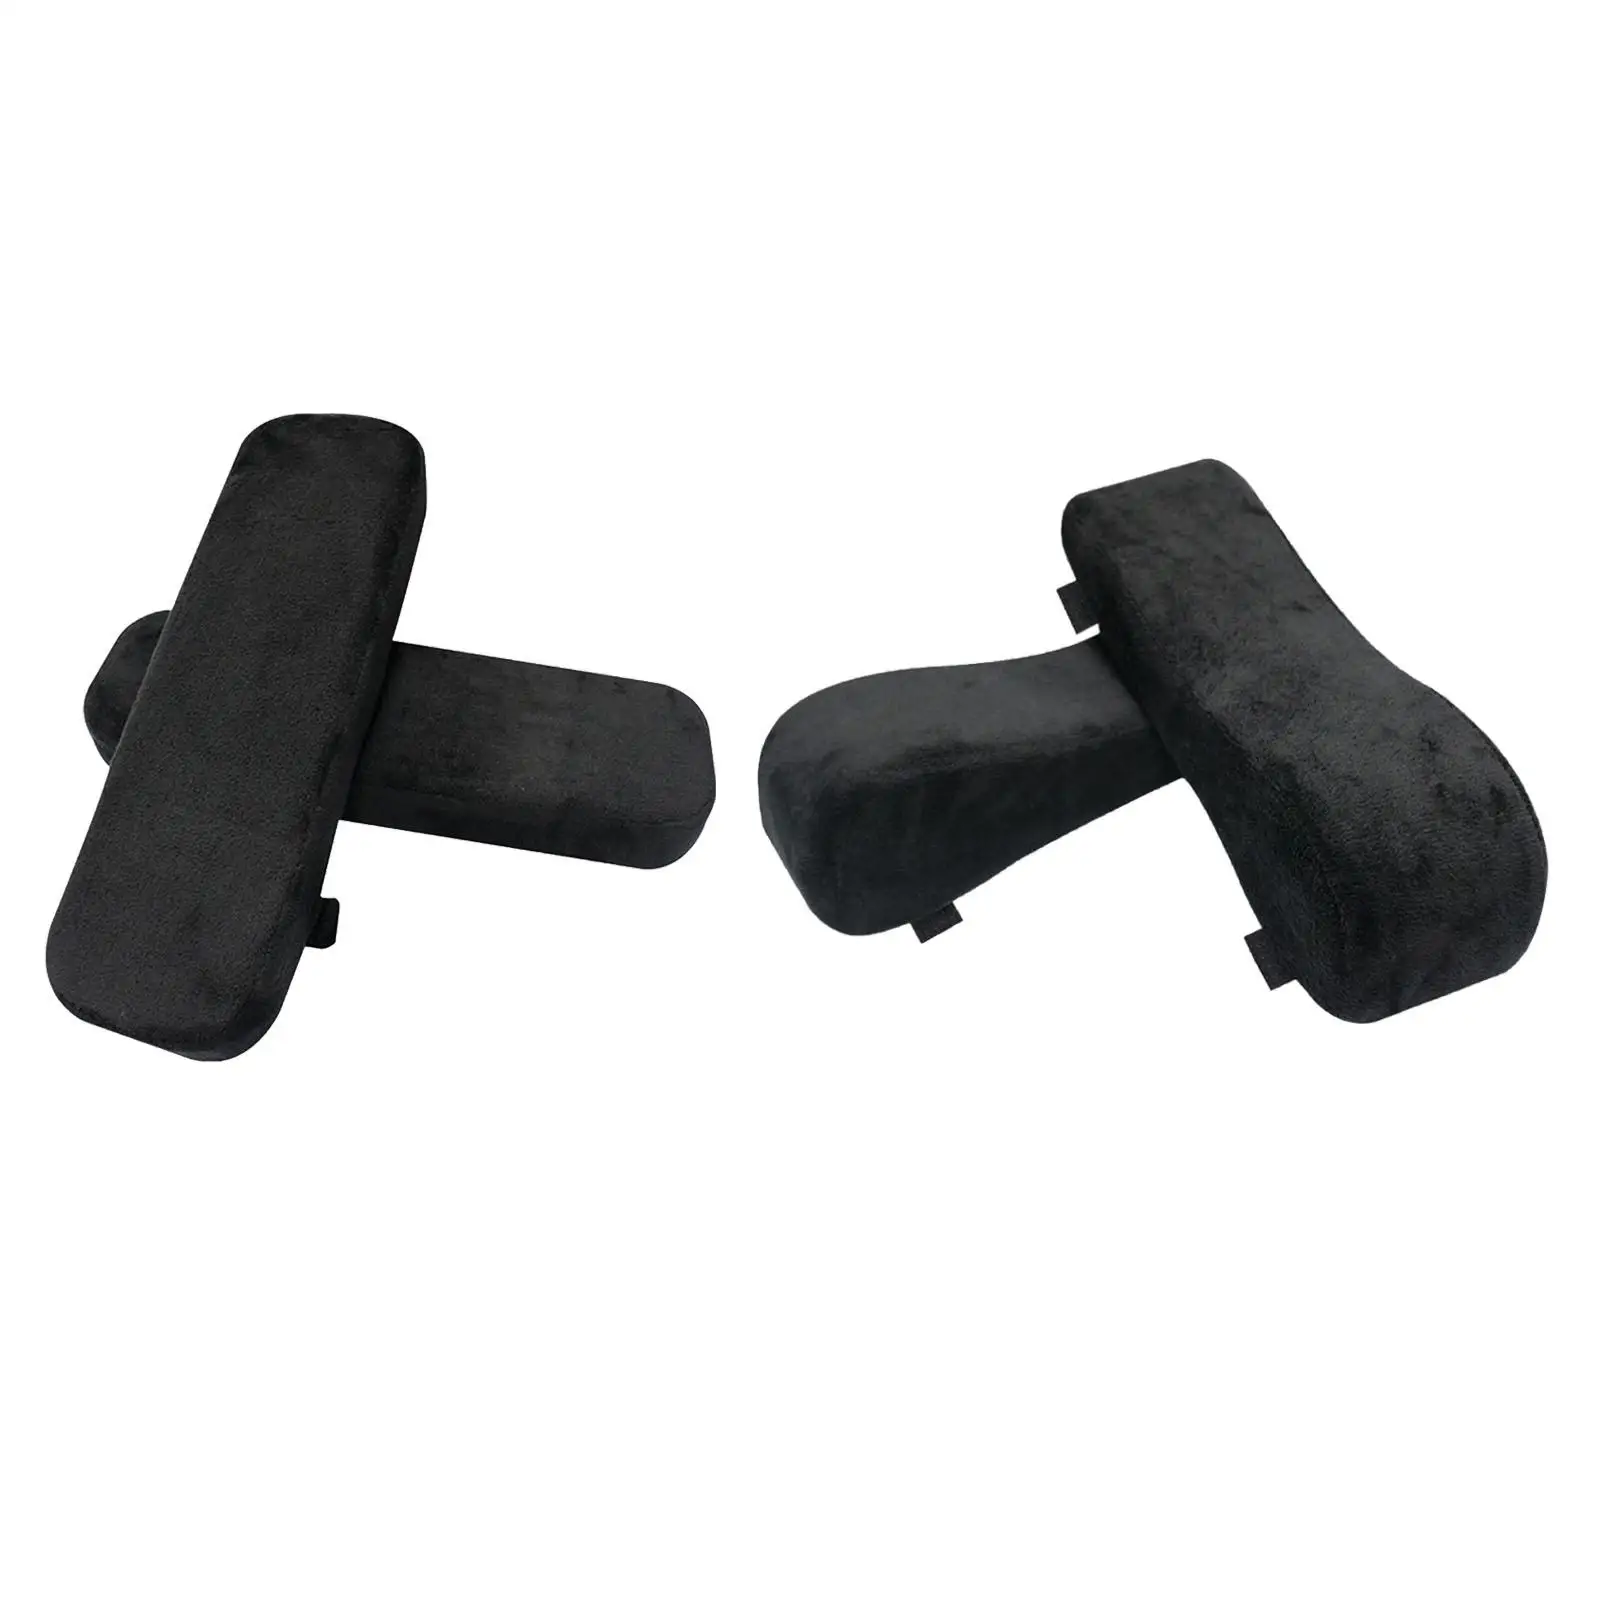 Set of 2 Chair Armrest Pad Memory Foam Easy to Attach Cushions Pad Elbow Arm Rest Cover for Office Chair Gaming Chair